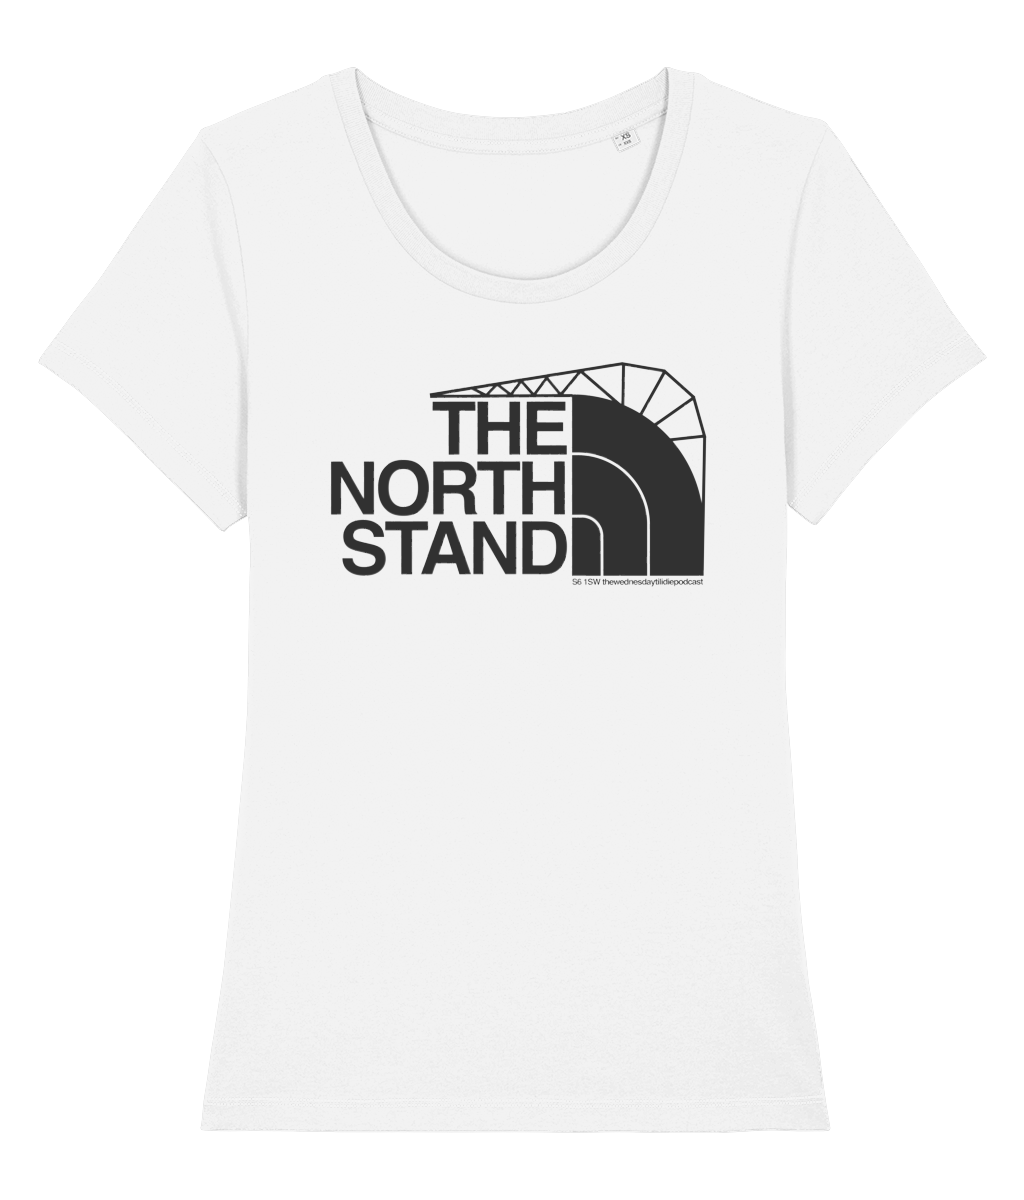 The North Stand - Tee (Womens)